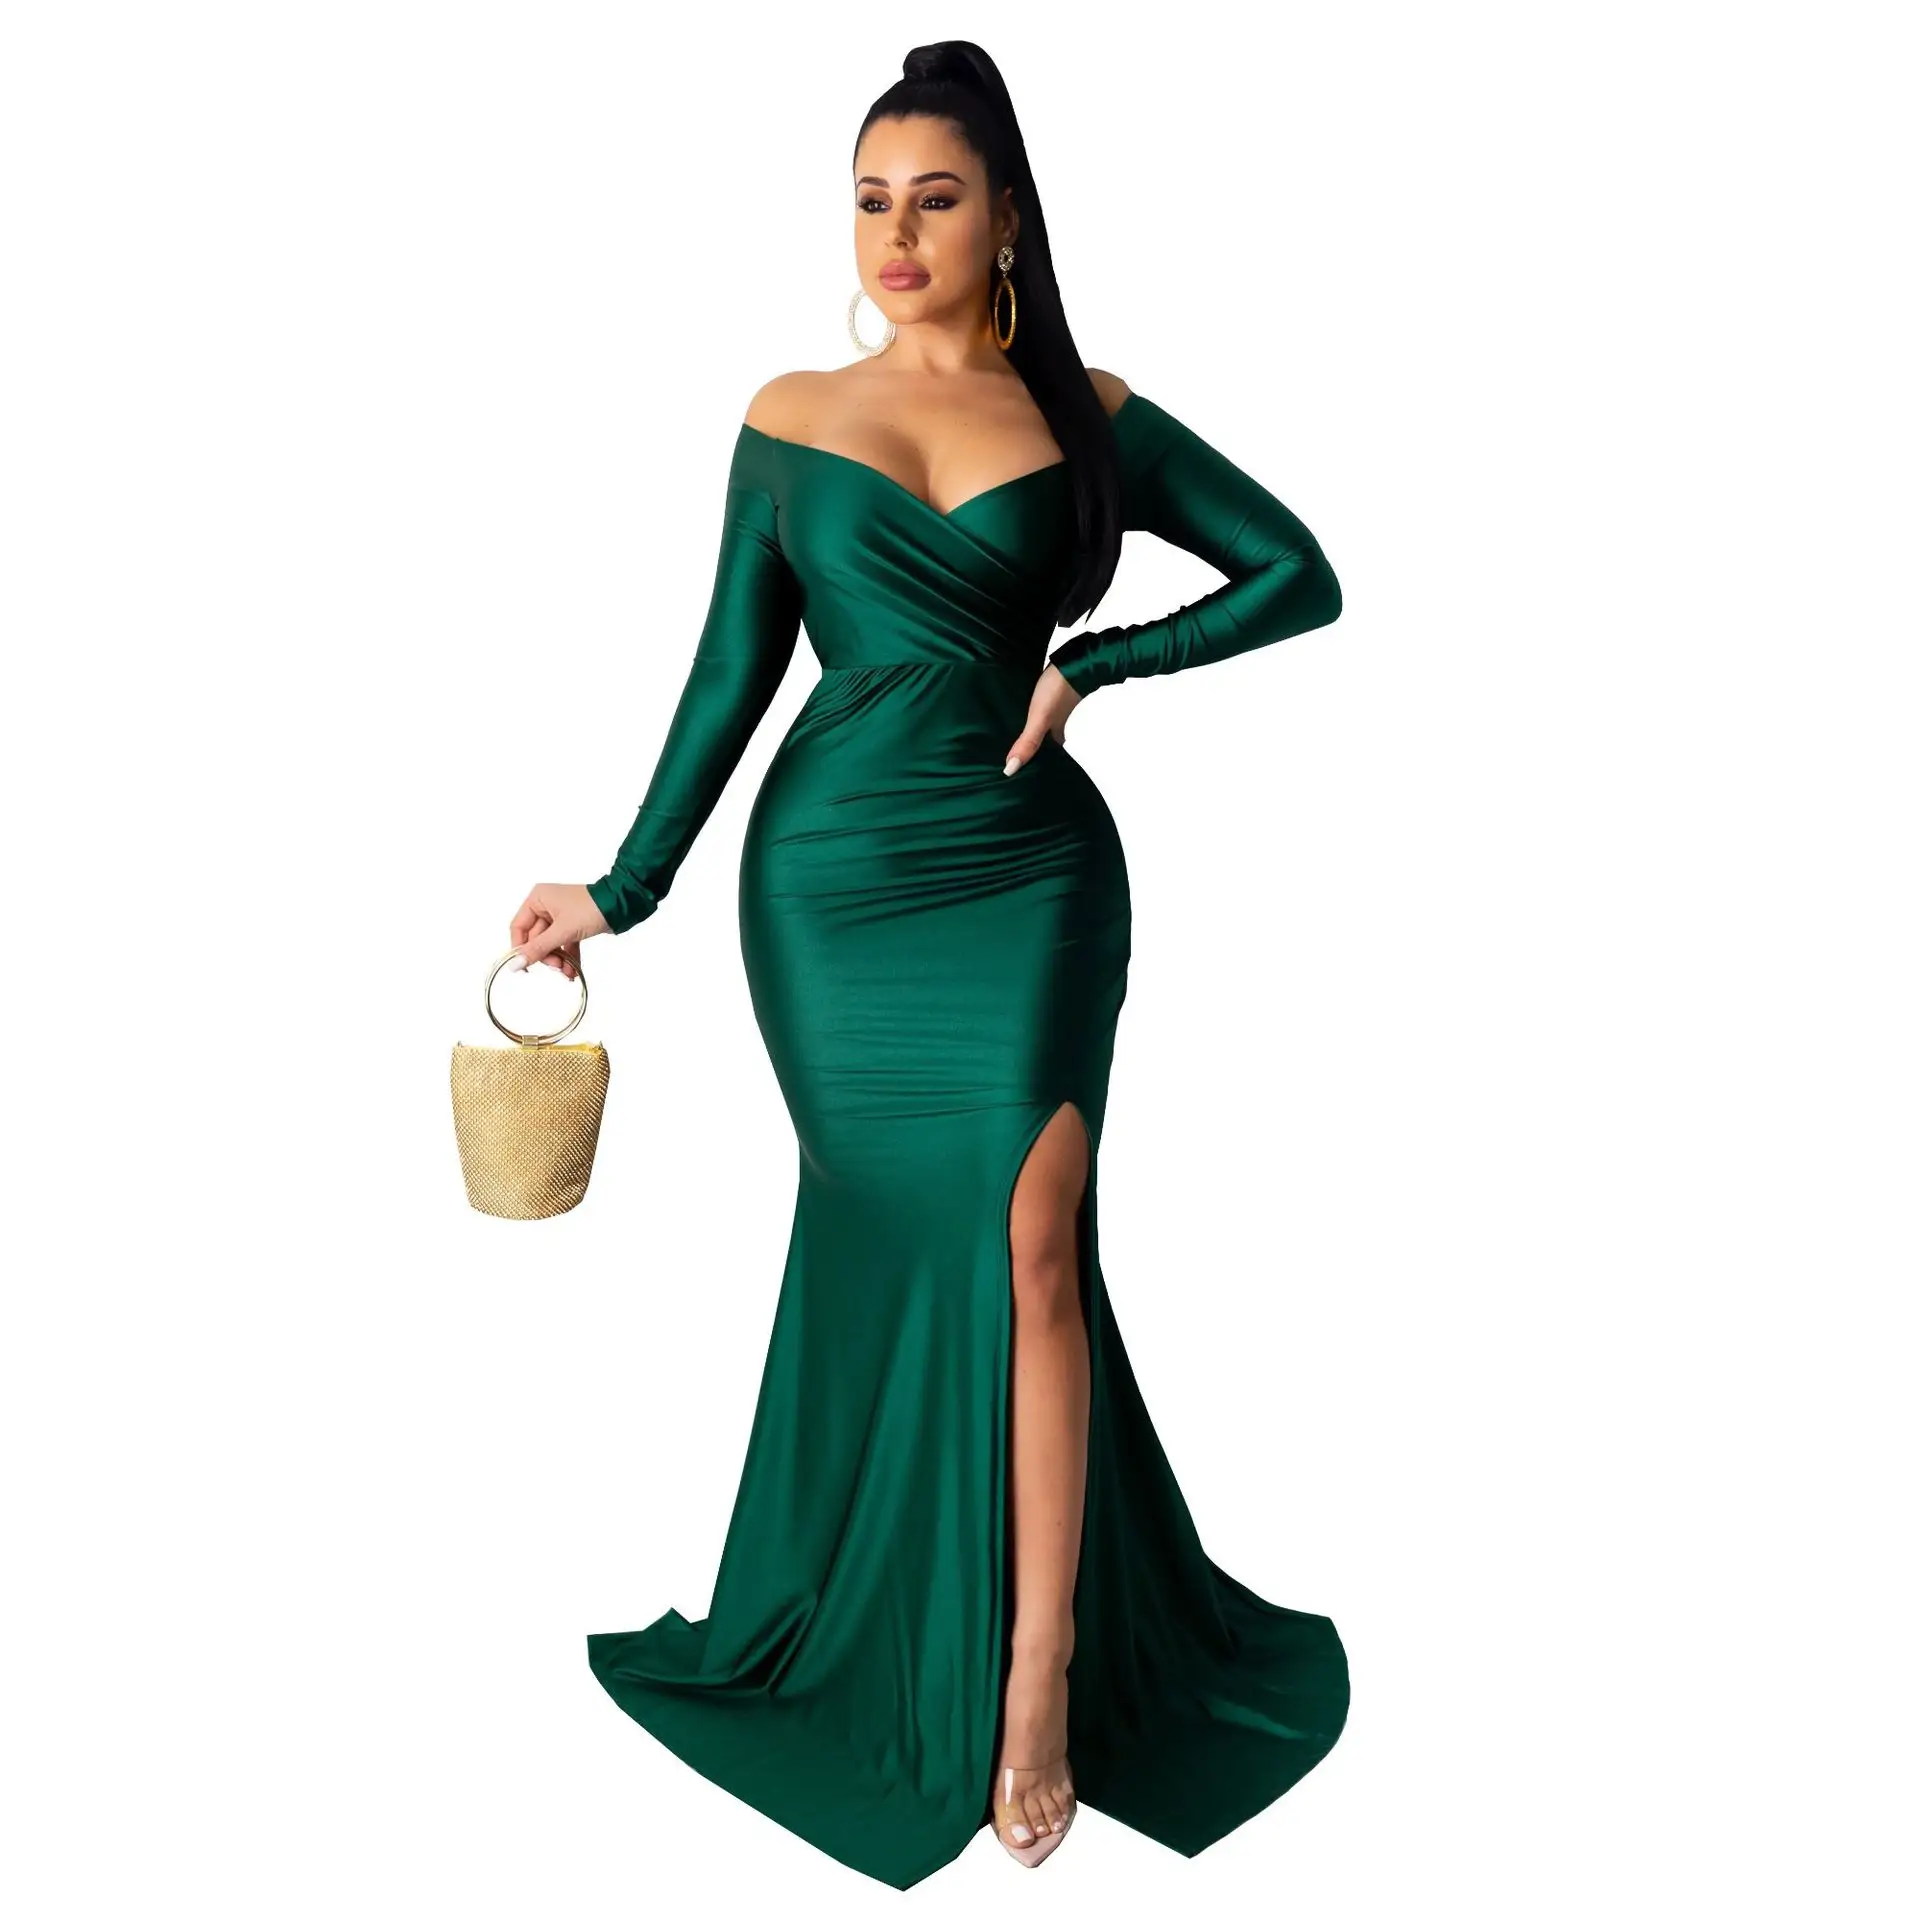 Women's Fashion Sexy V-Neck Long Sleeve Split Solid Color Evening Dress Dress Women's Casual Dress Long Sleeve Gown